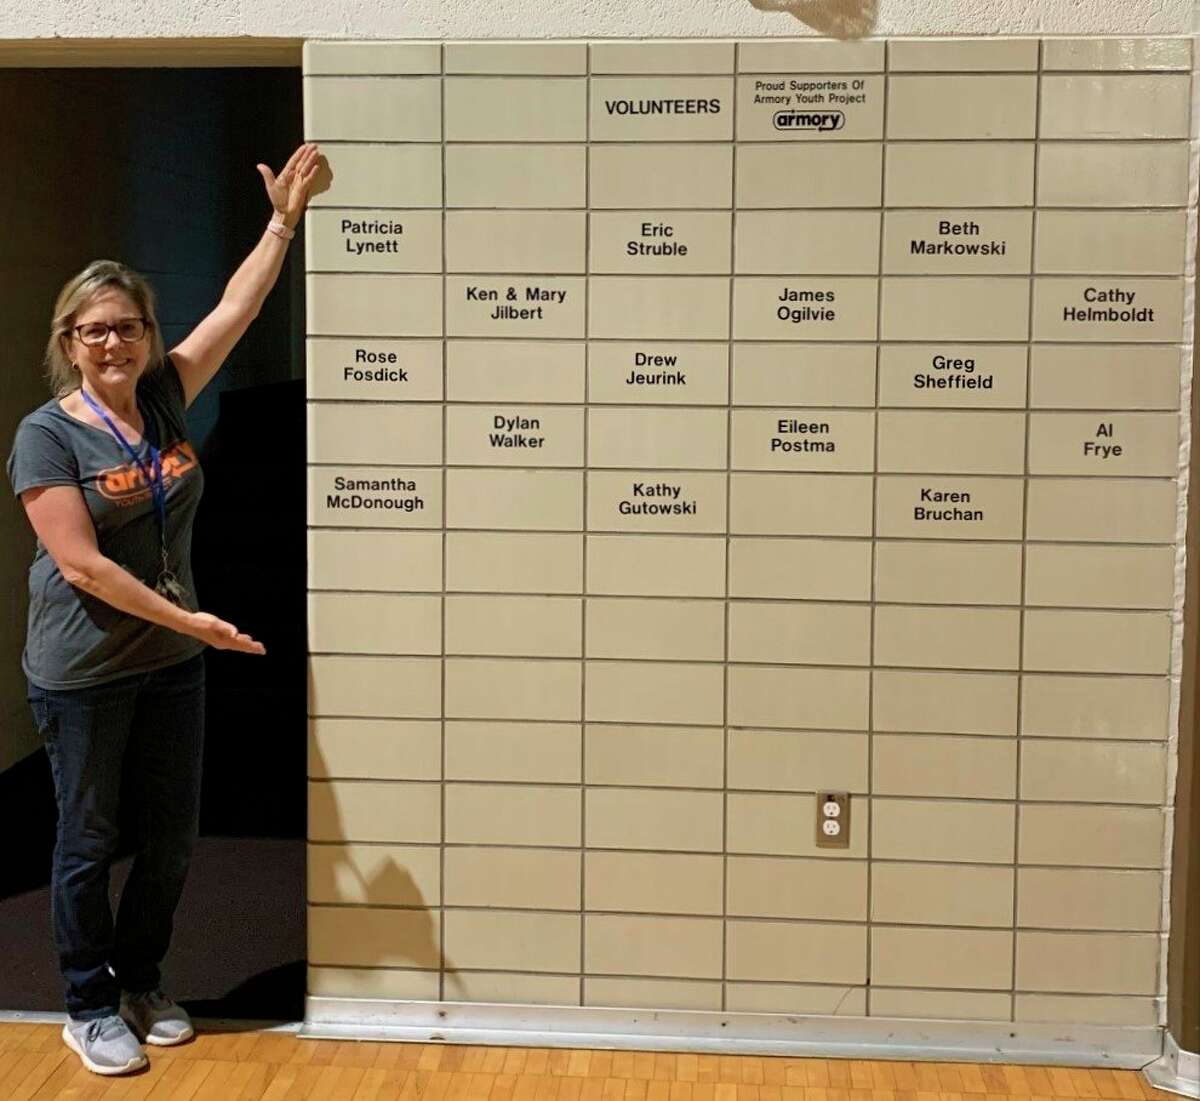 Amy Wojciechowski, Armory Youth Project executive director, shows off the Wall of Service which features the names of volunteers who have provided over 150 hours of service in the past year. (Courtesy photo)